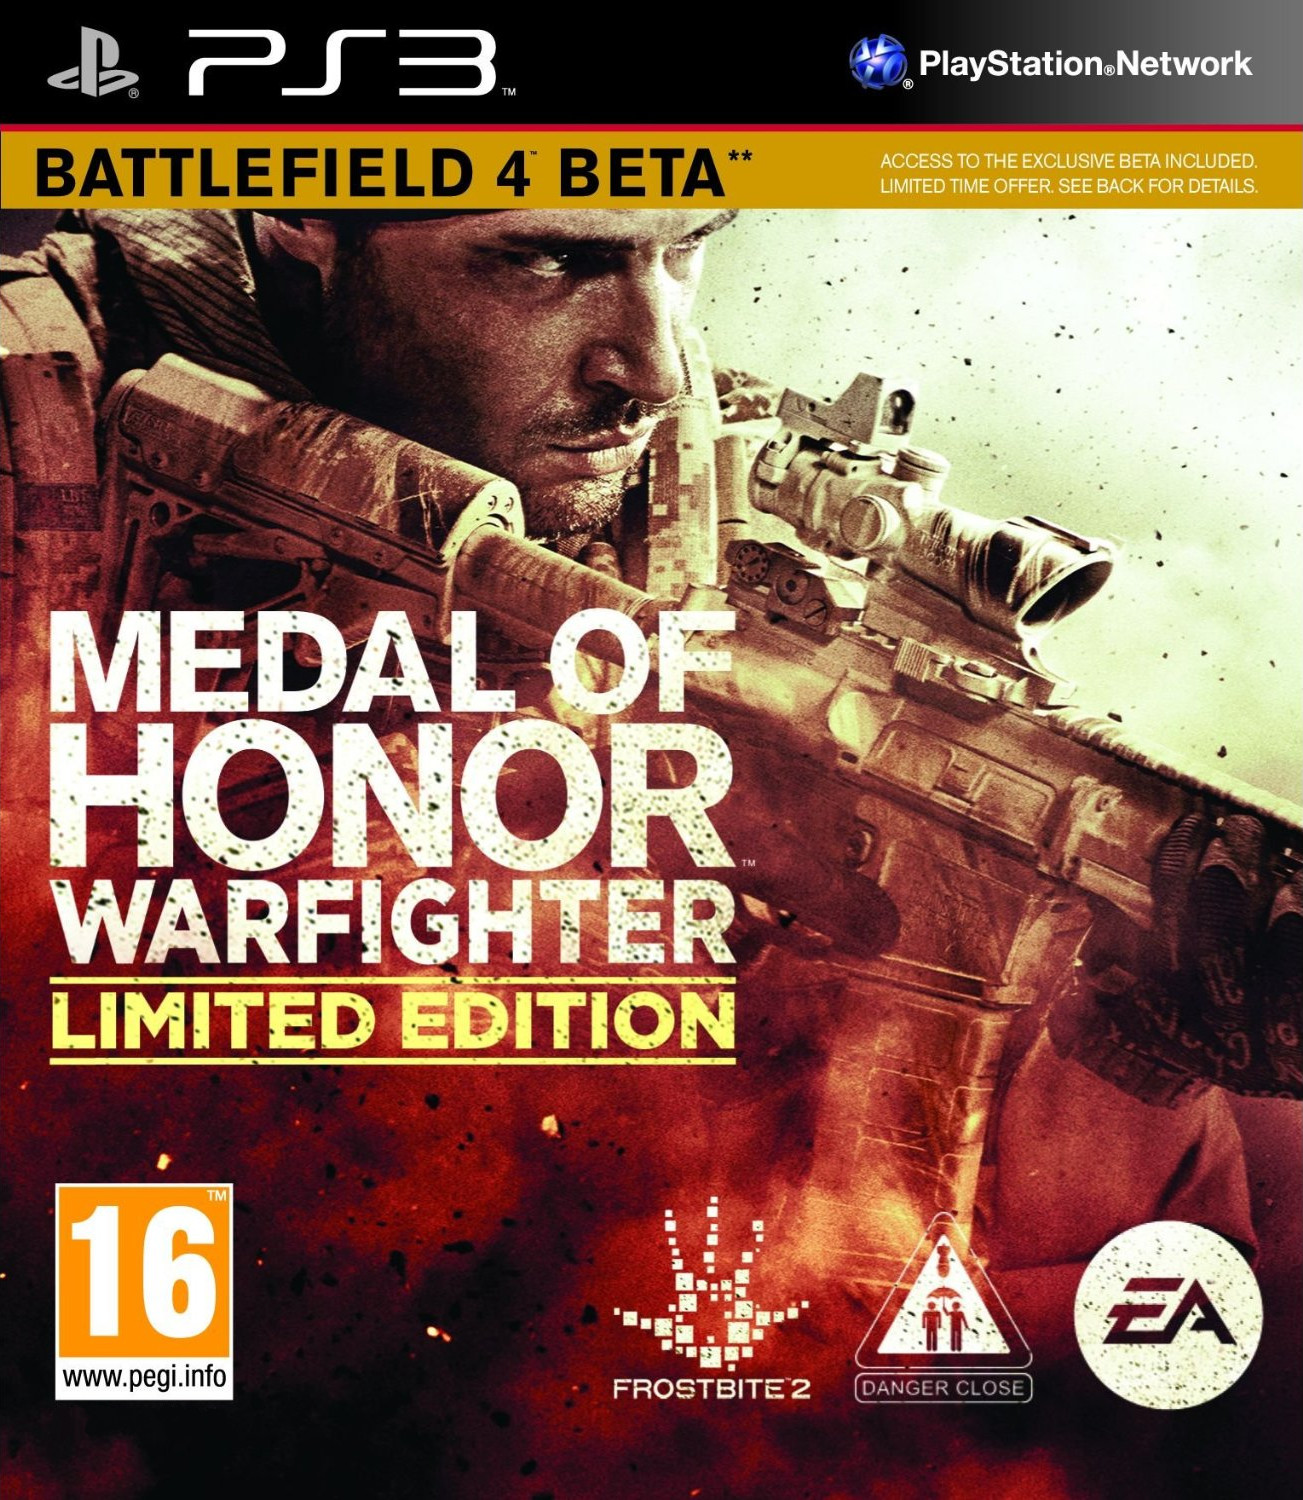 buy-medal-of-honor-warfighter-limited-edition-ps3-from-19-99-today-best-deals-on